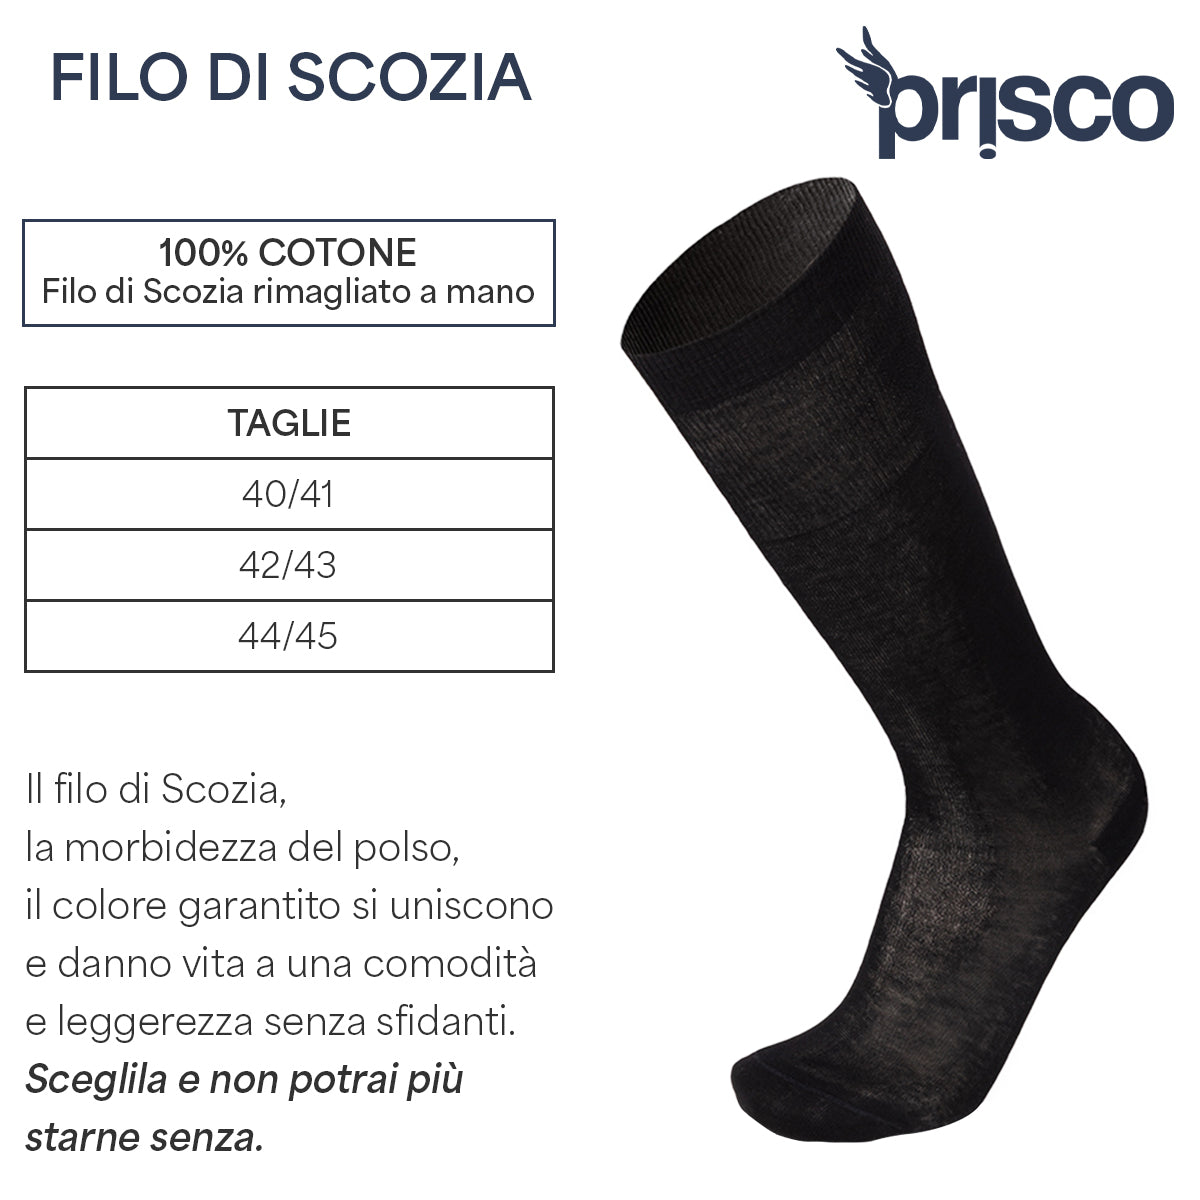 Long Stocking in Lisle for Men | Plain Color | Pack of 6 pairs | 1000 L